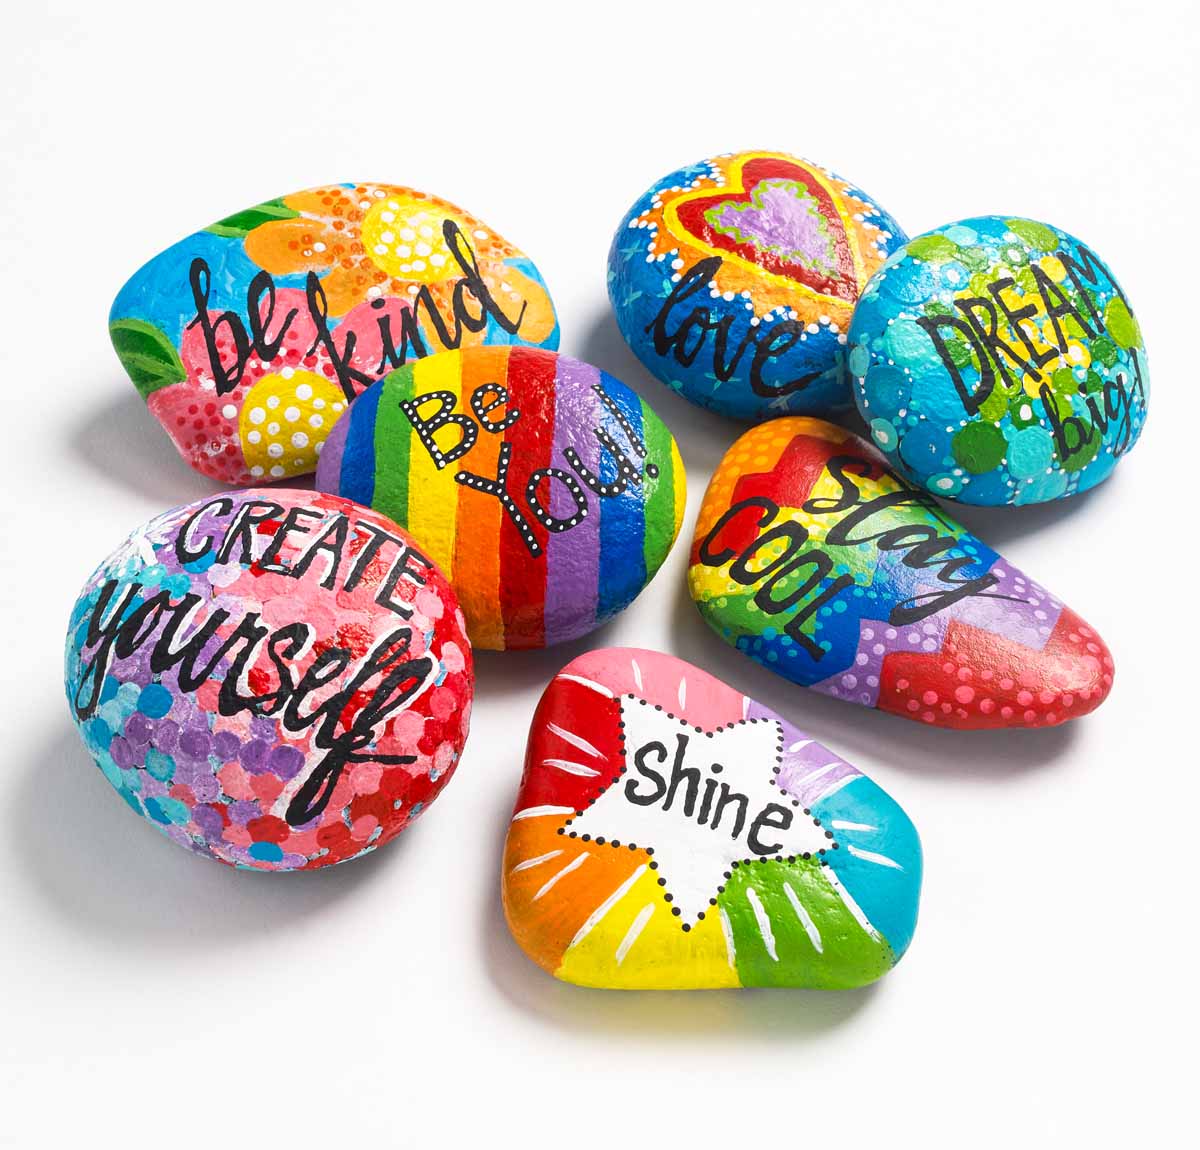 Kindness Rocks! Paint Event: Grades 4 and up!